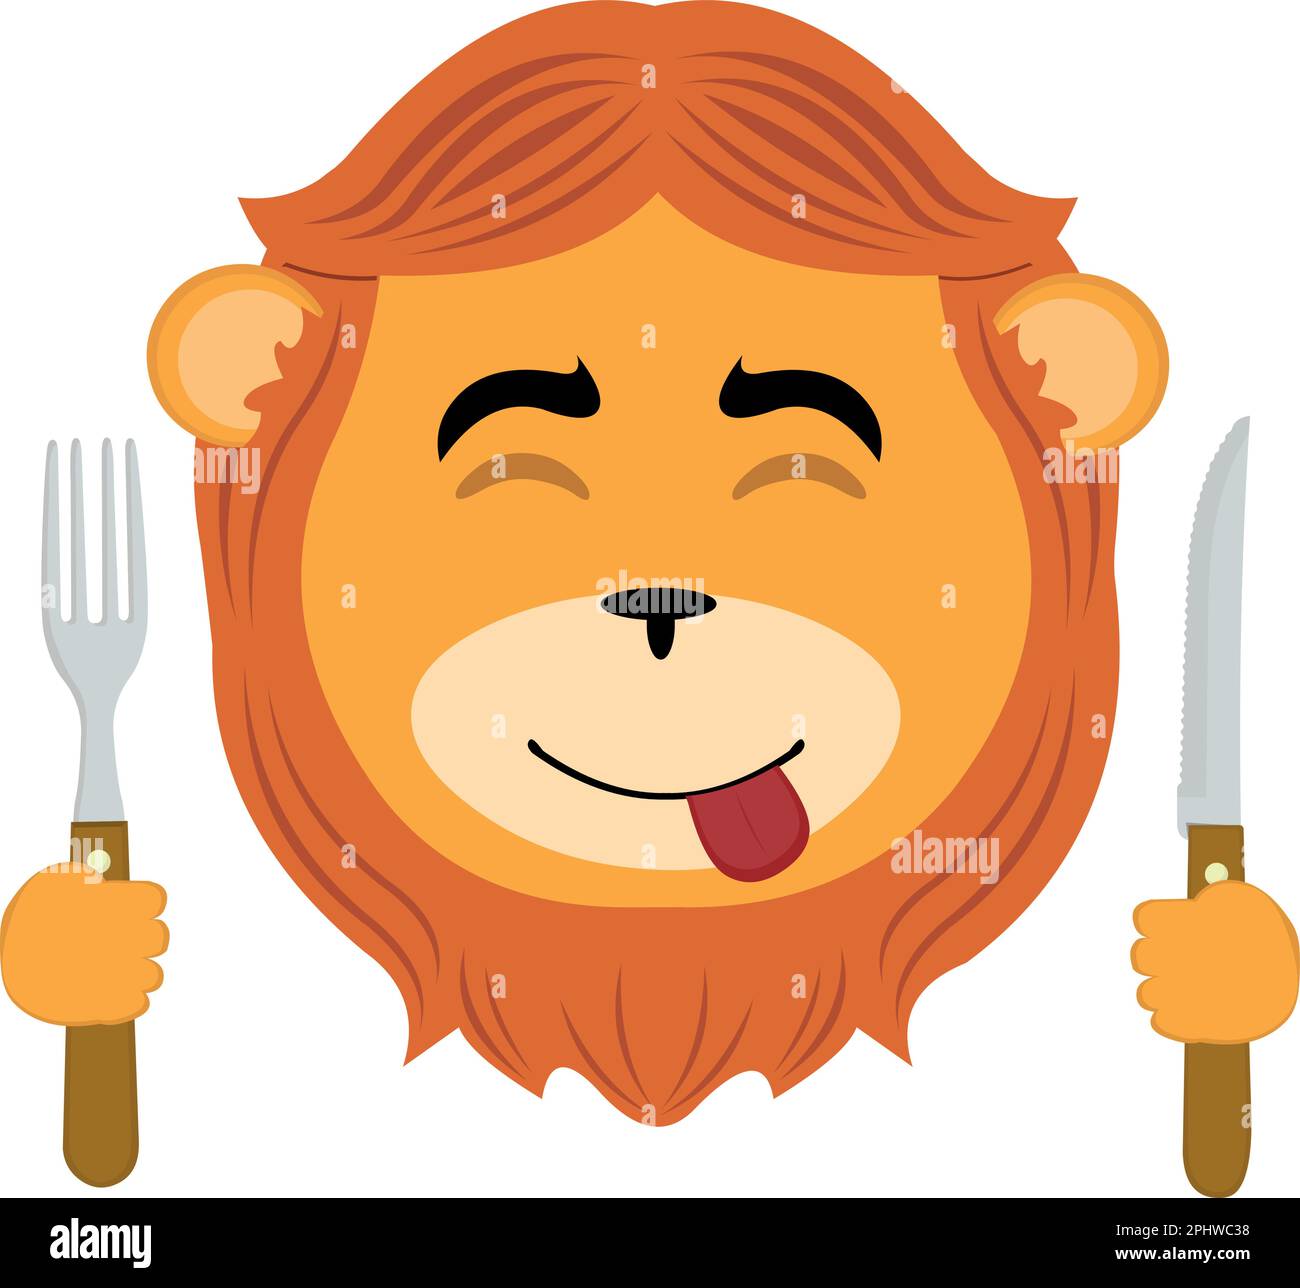 https://c8.alamy.com/comp/2PHWC38/vector-illustration-face-of-a-lion-cartoon-with-an-expression-of-yummy-that-delicious-with-a-knife-and-fork-in-his-hands-2PHWC38.jpg